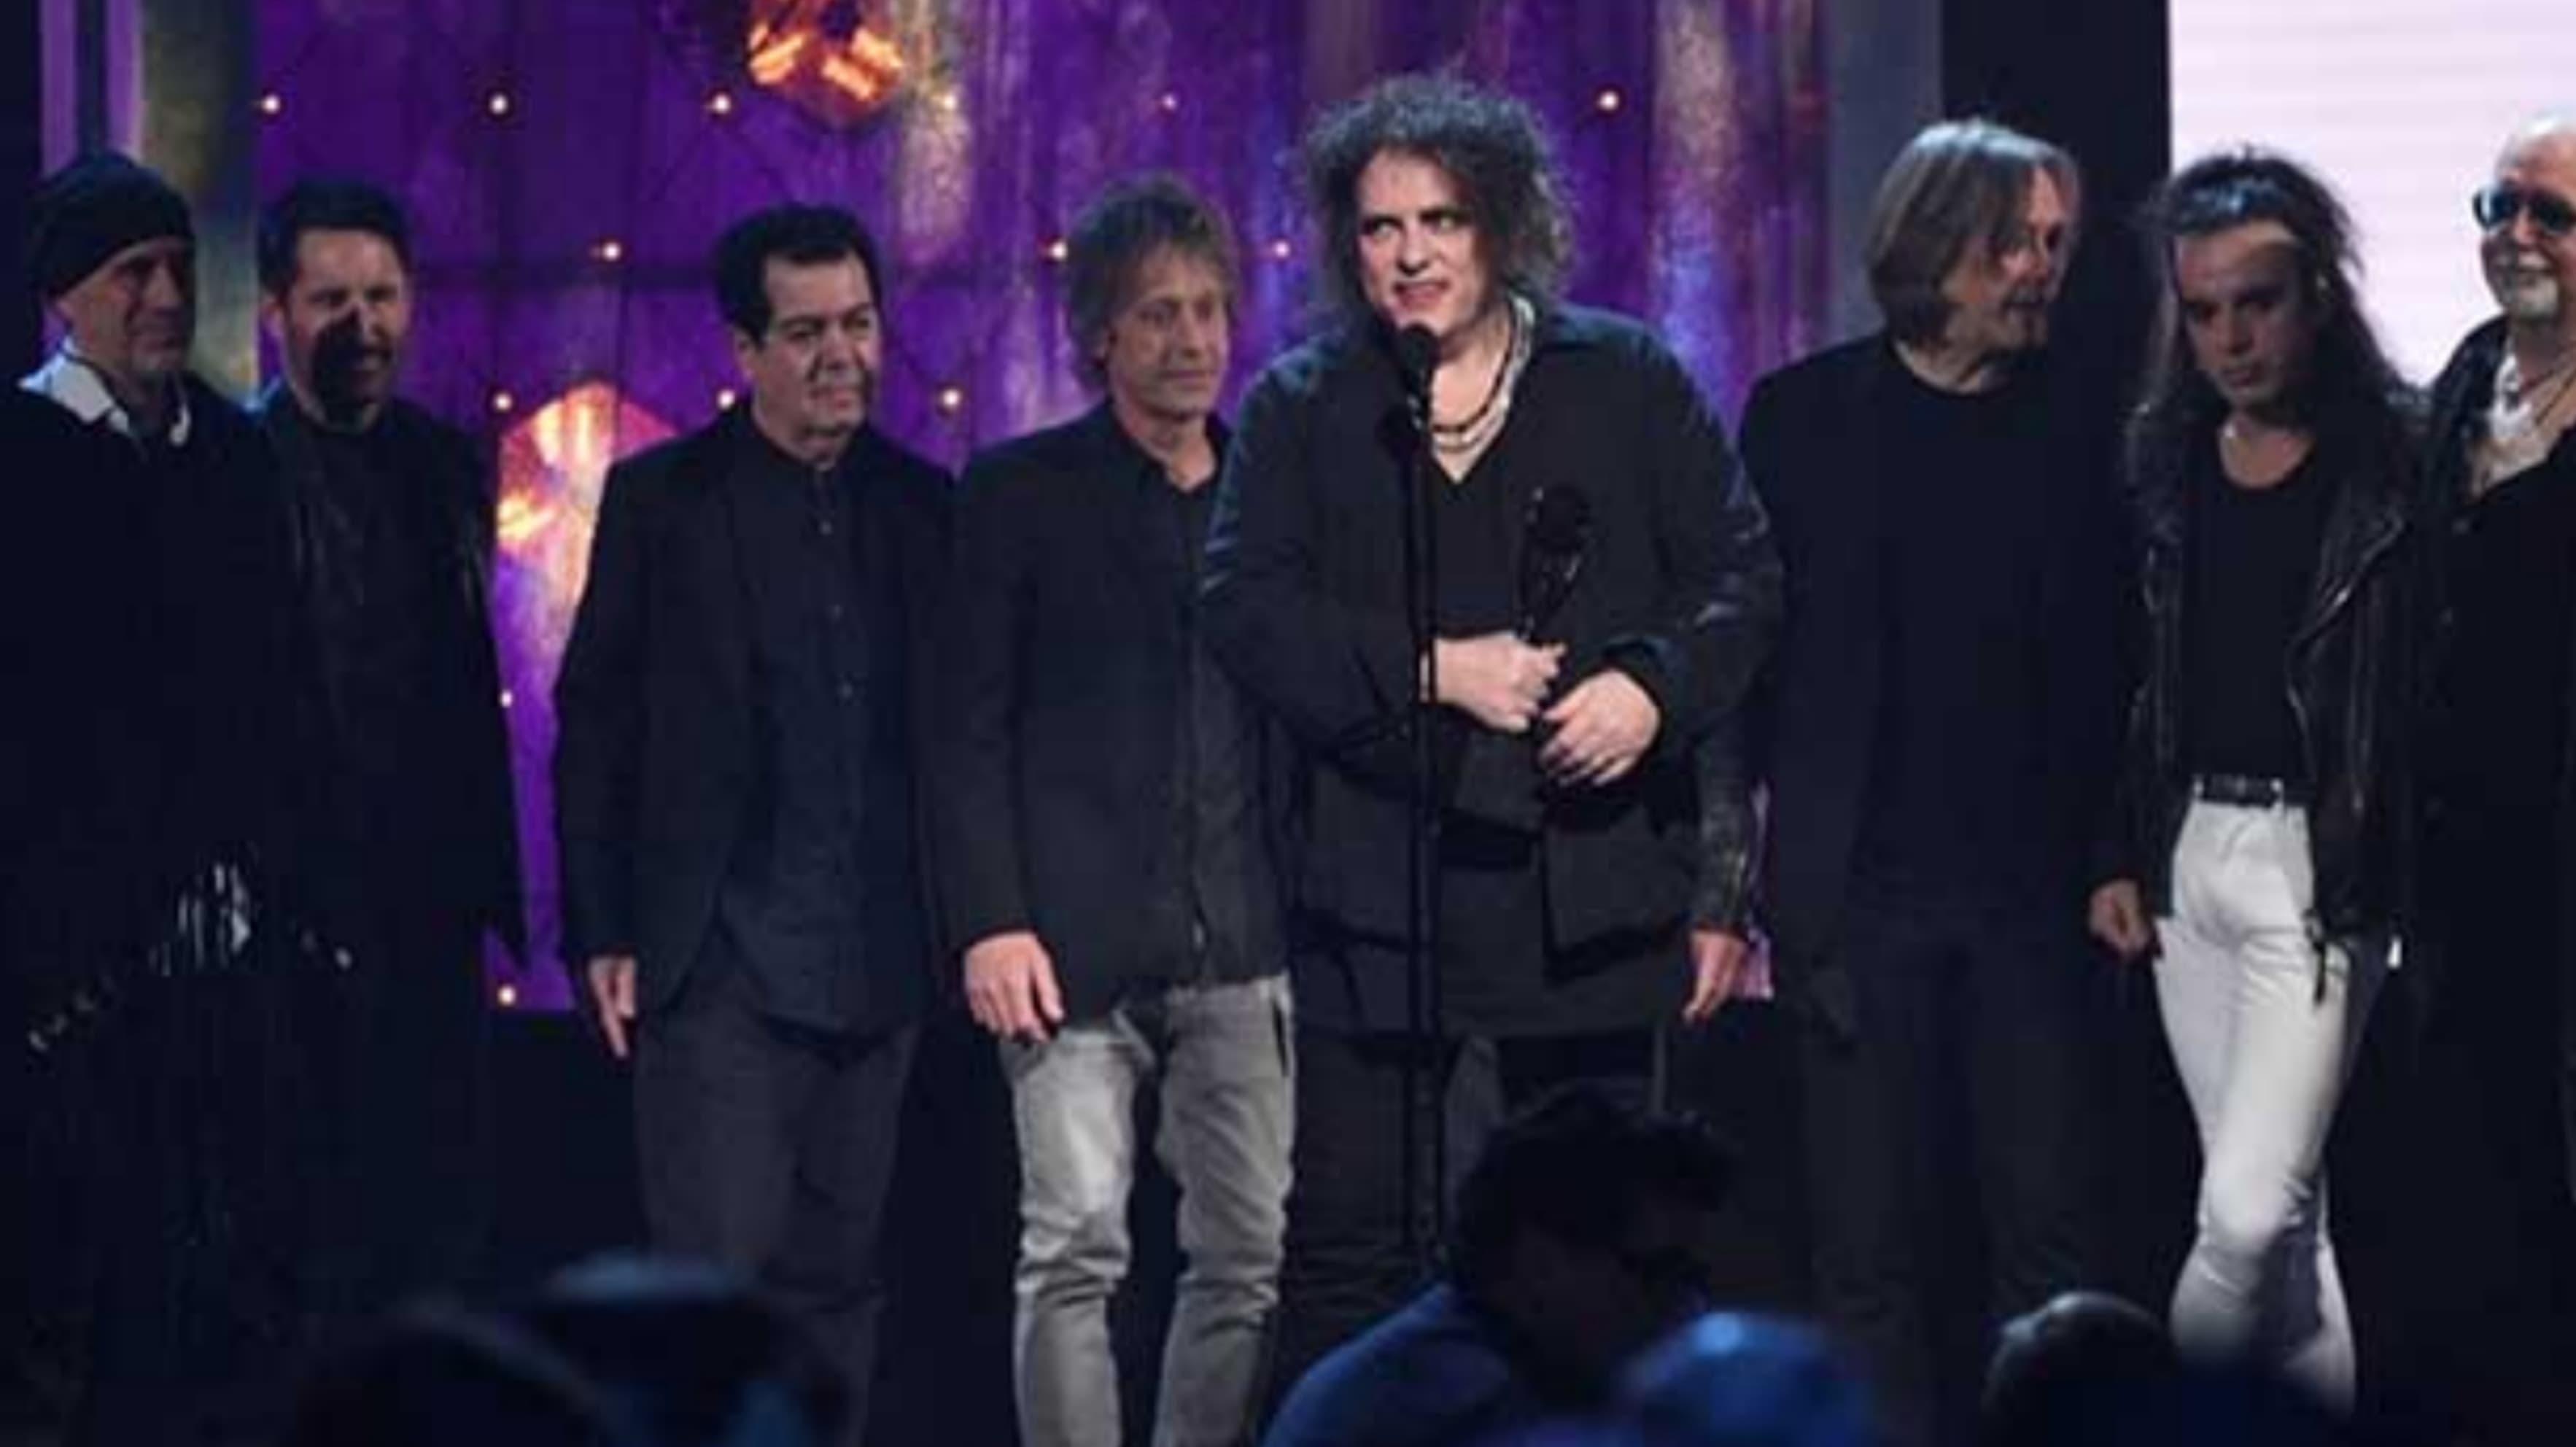 The Cure Rock & Roll Hall Of Fame 2019 backdrop